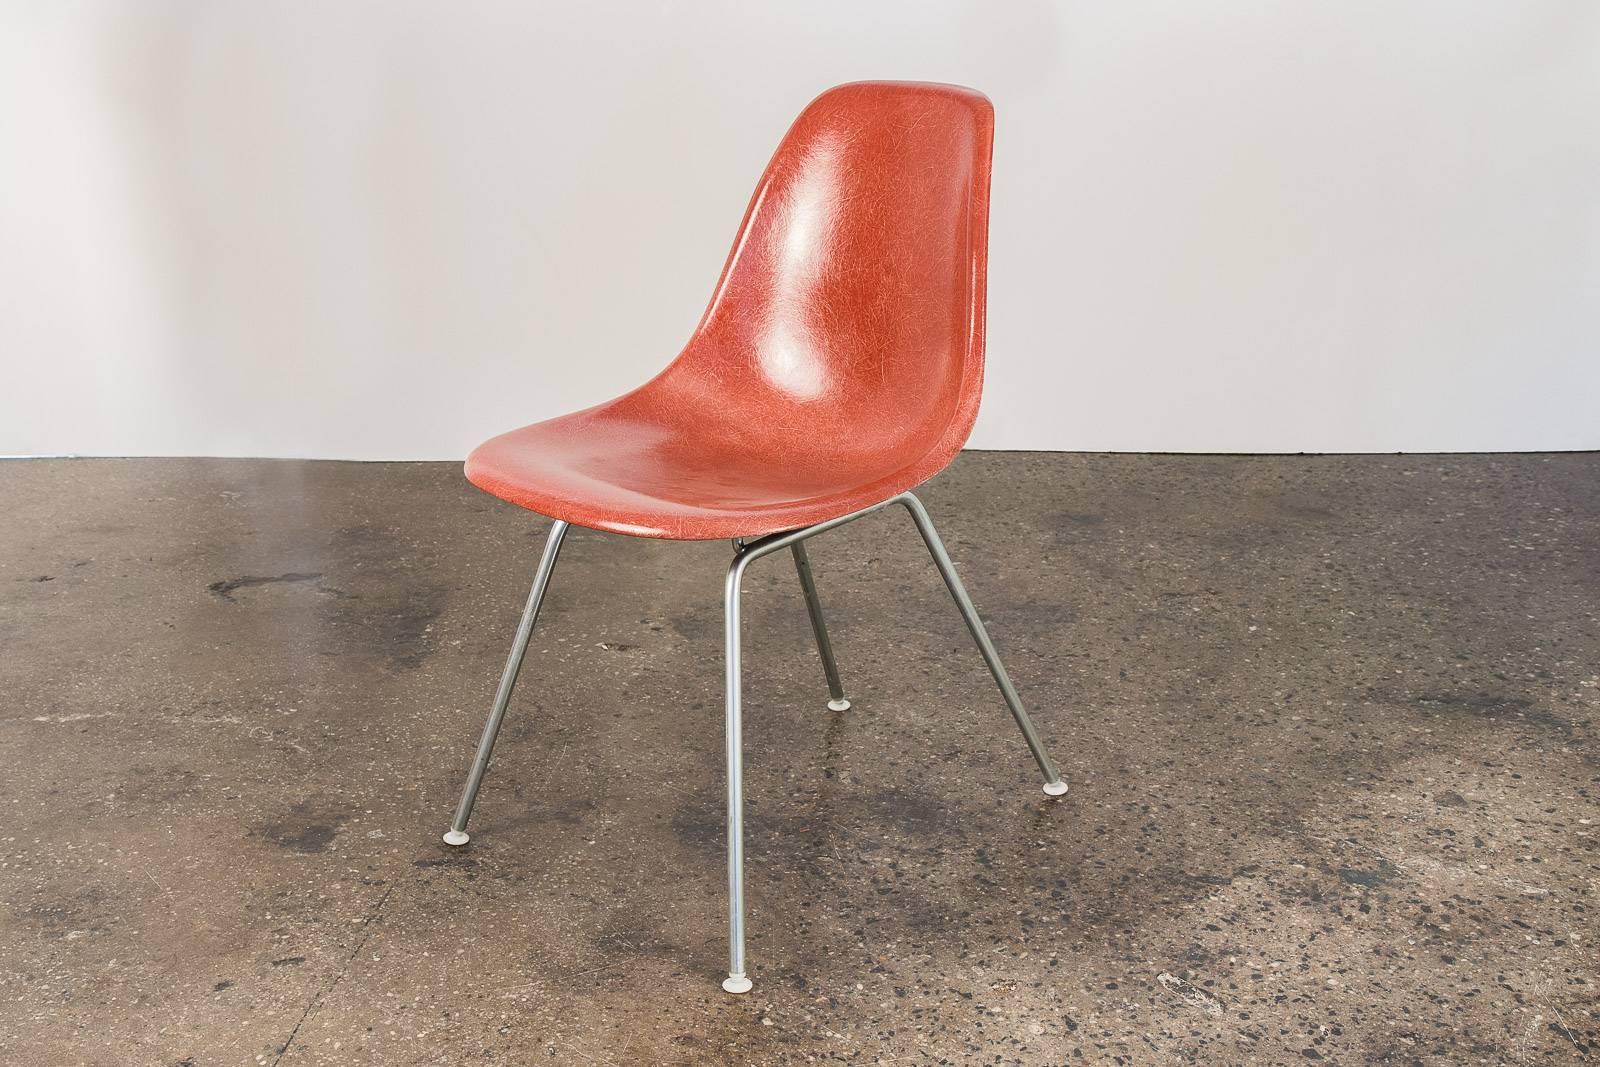 Original 1960s Eames terracotta fiberglass shell chairs with original H bases, designed by Charles and Ray Eames for Herman Miller. The scarce terracotta shell has its original finish with distinct thread texture. Narrow mount. Shown here mounted on